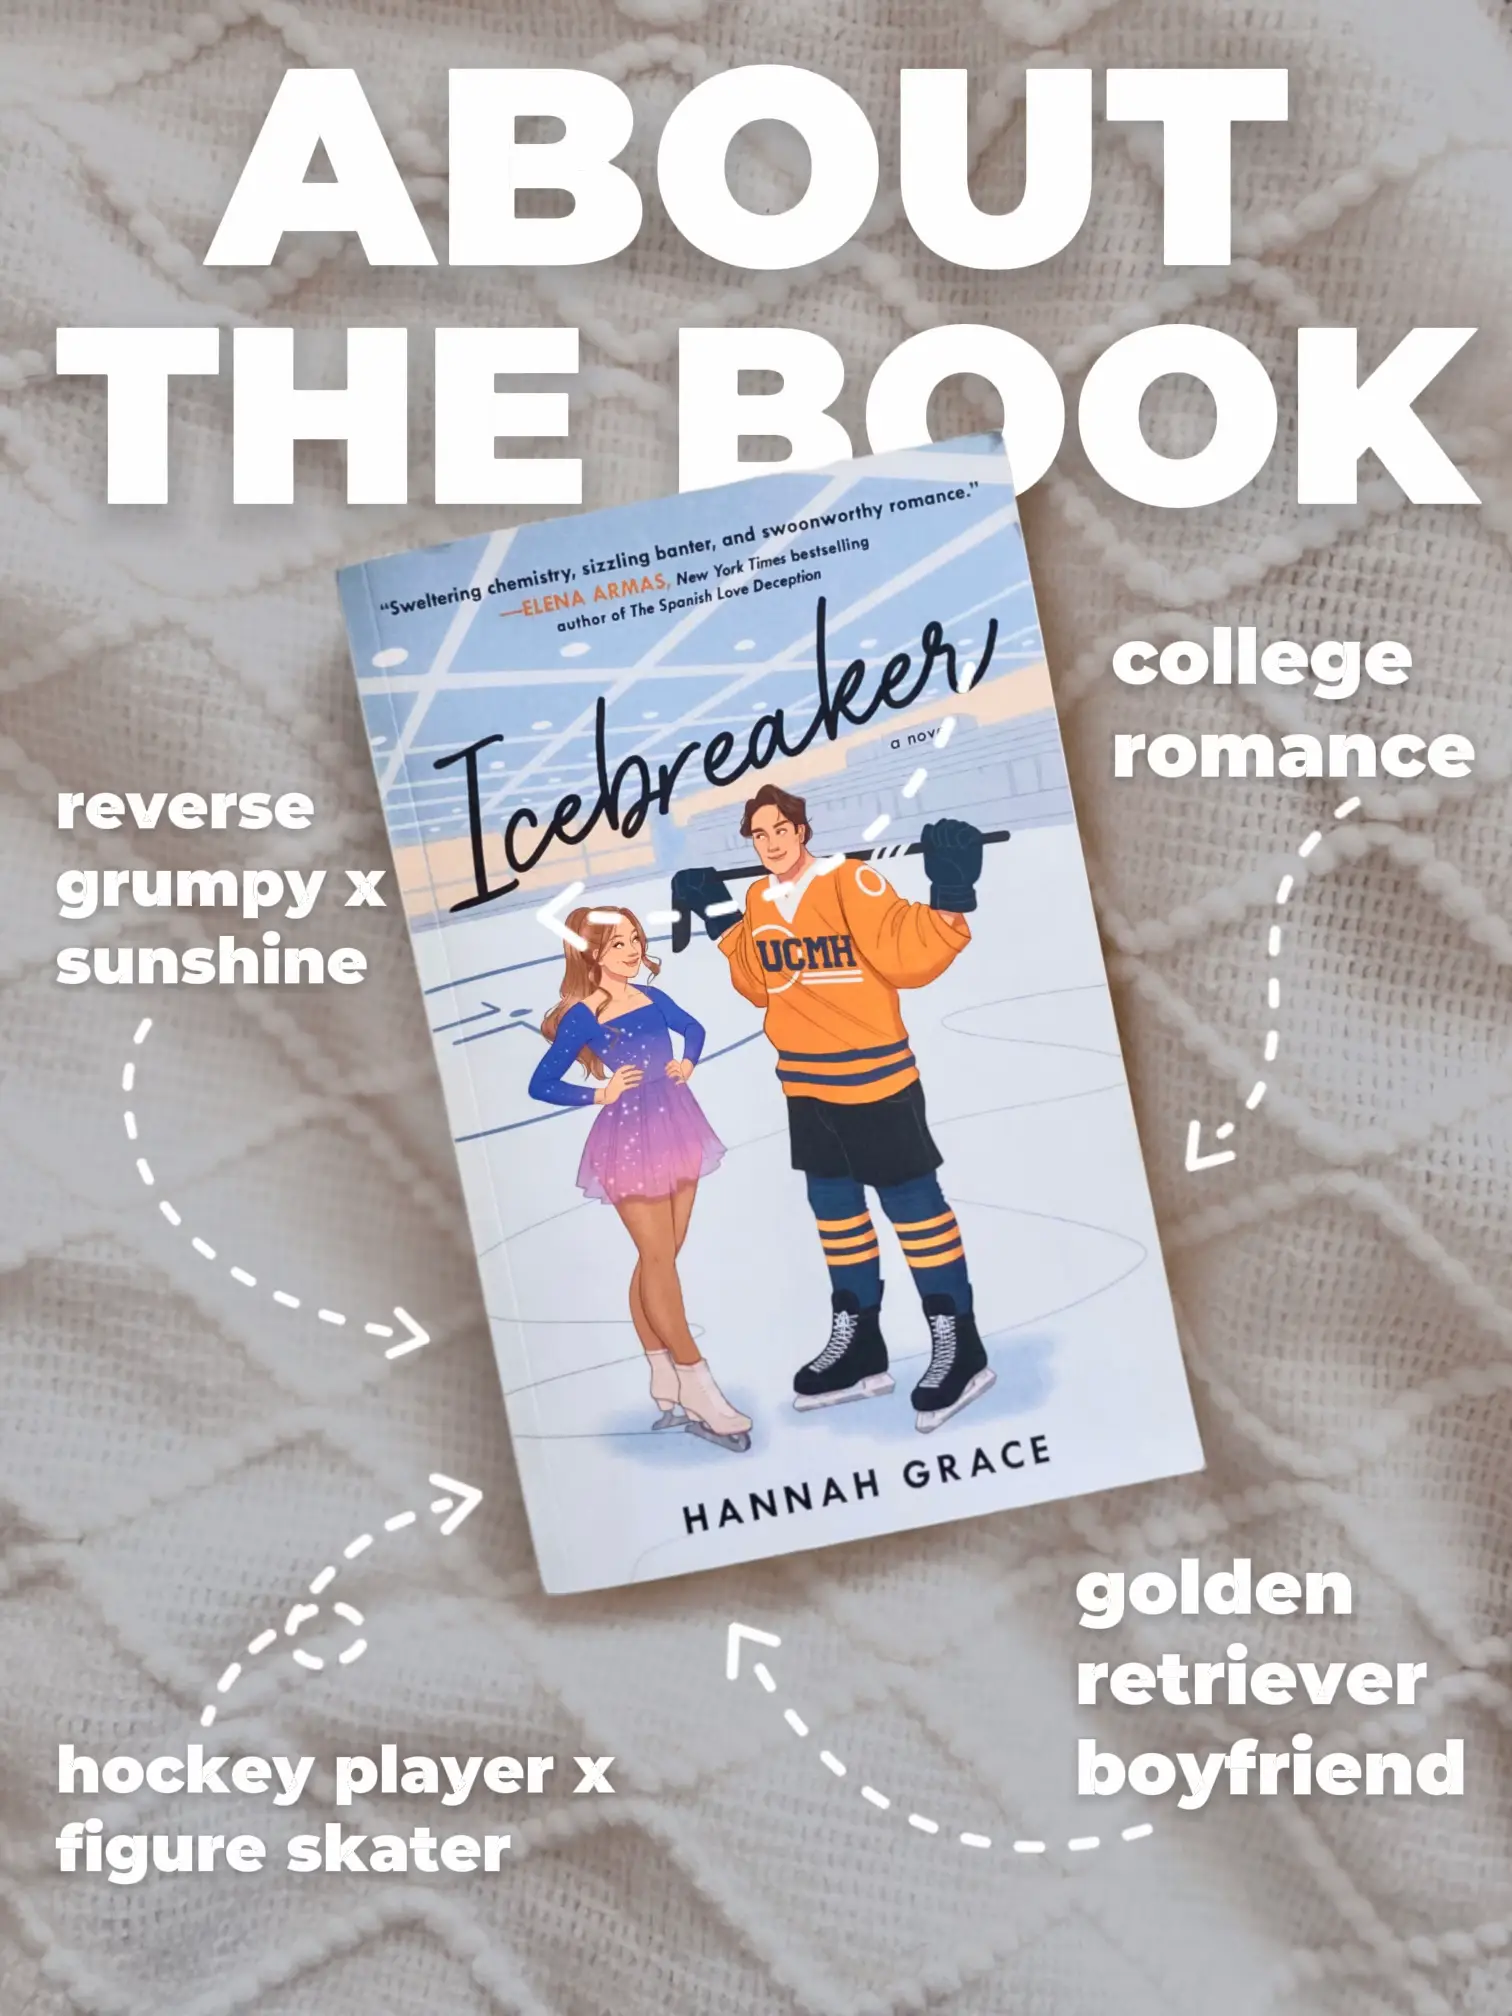 Icebreaker, Book by Hannah Grace, Official Publisher Page